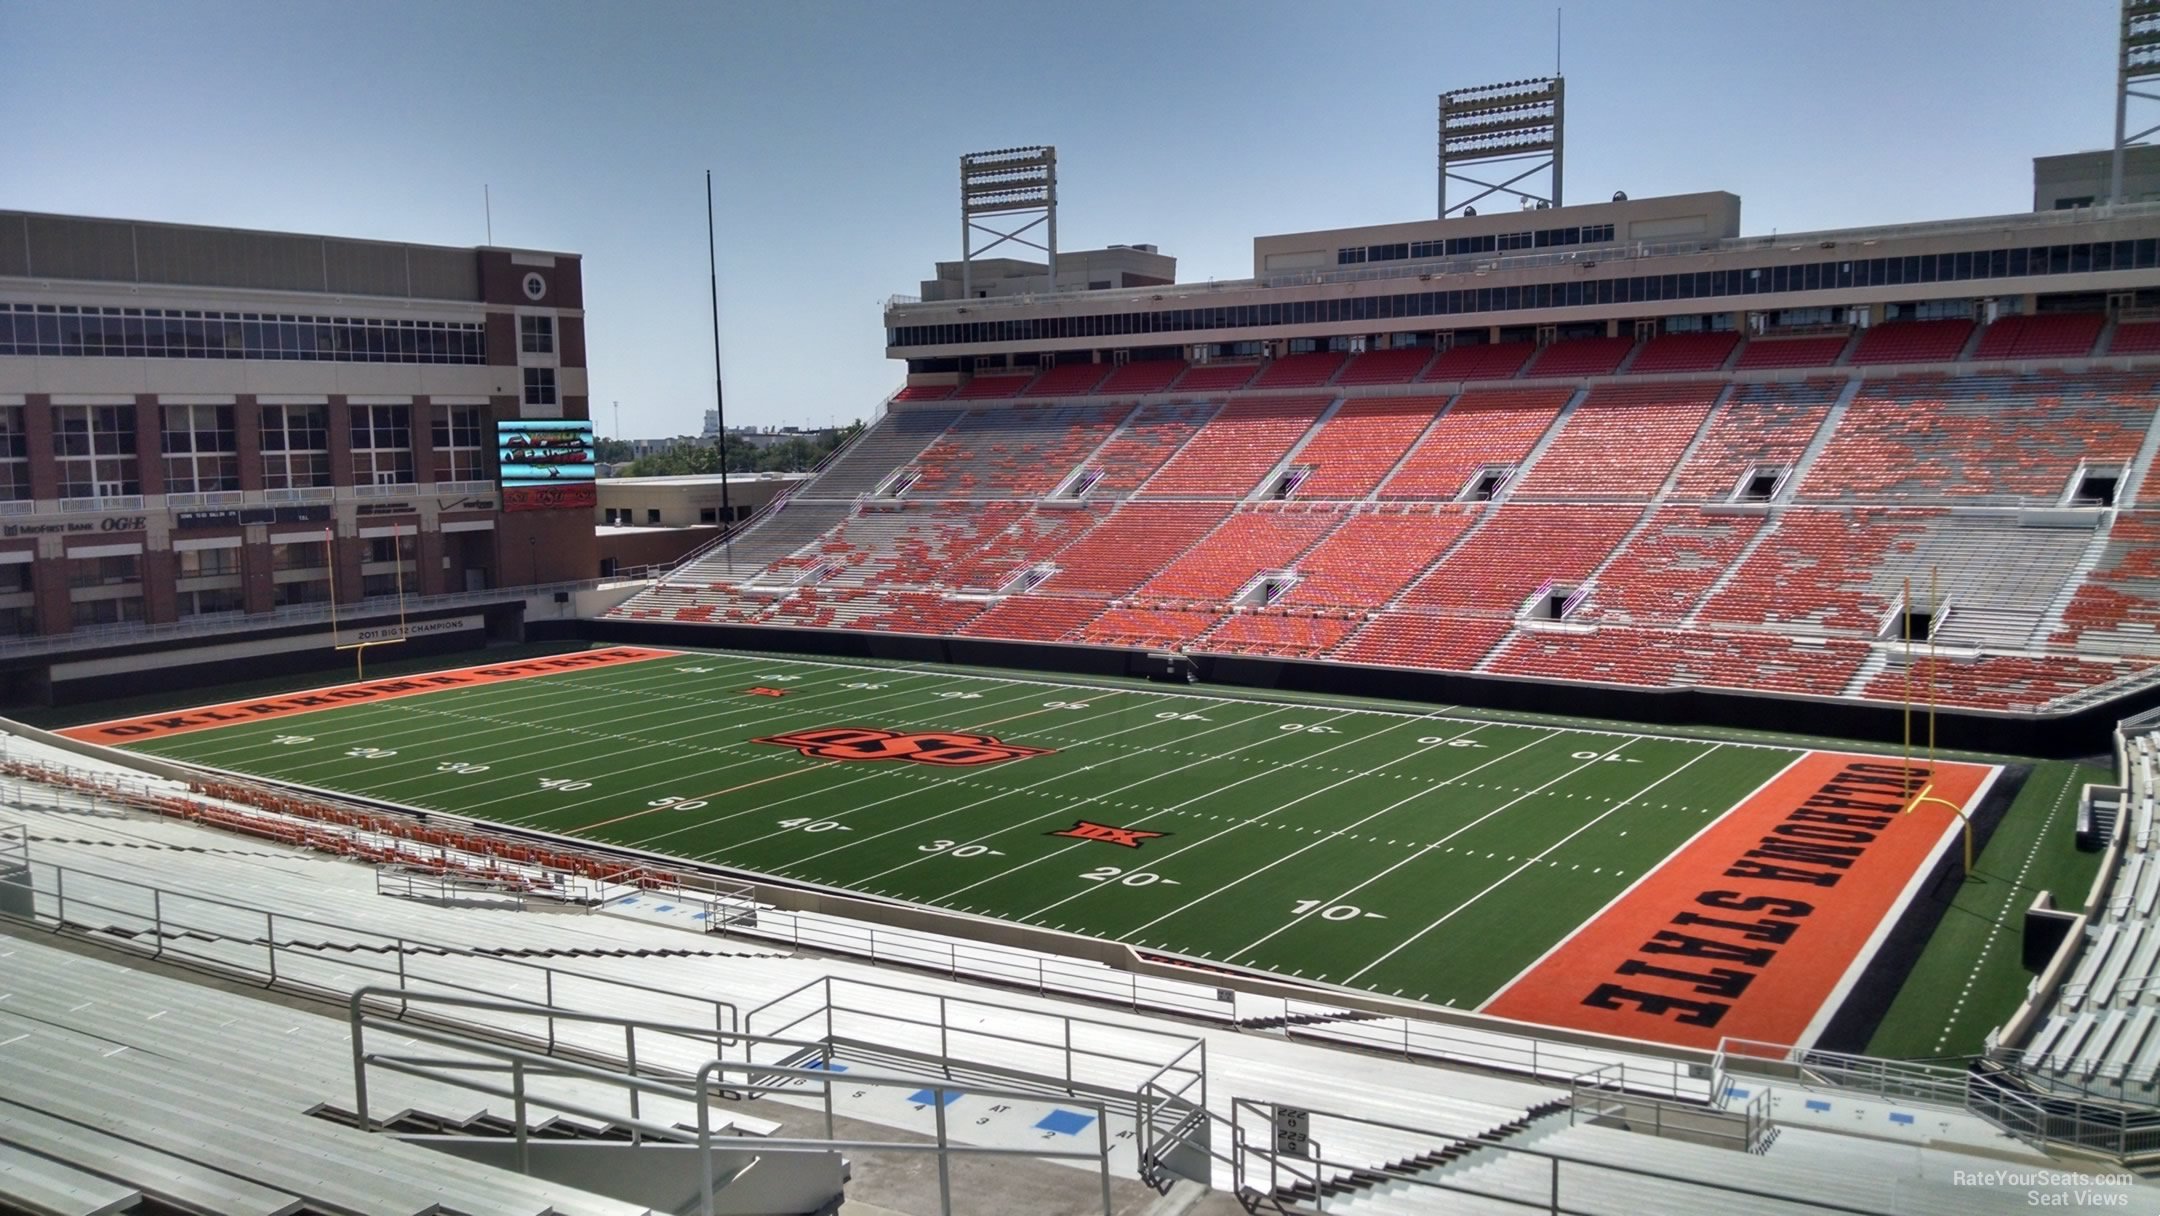 section 328, row 19 seat view  - boone pickens stadium